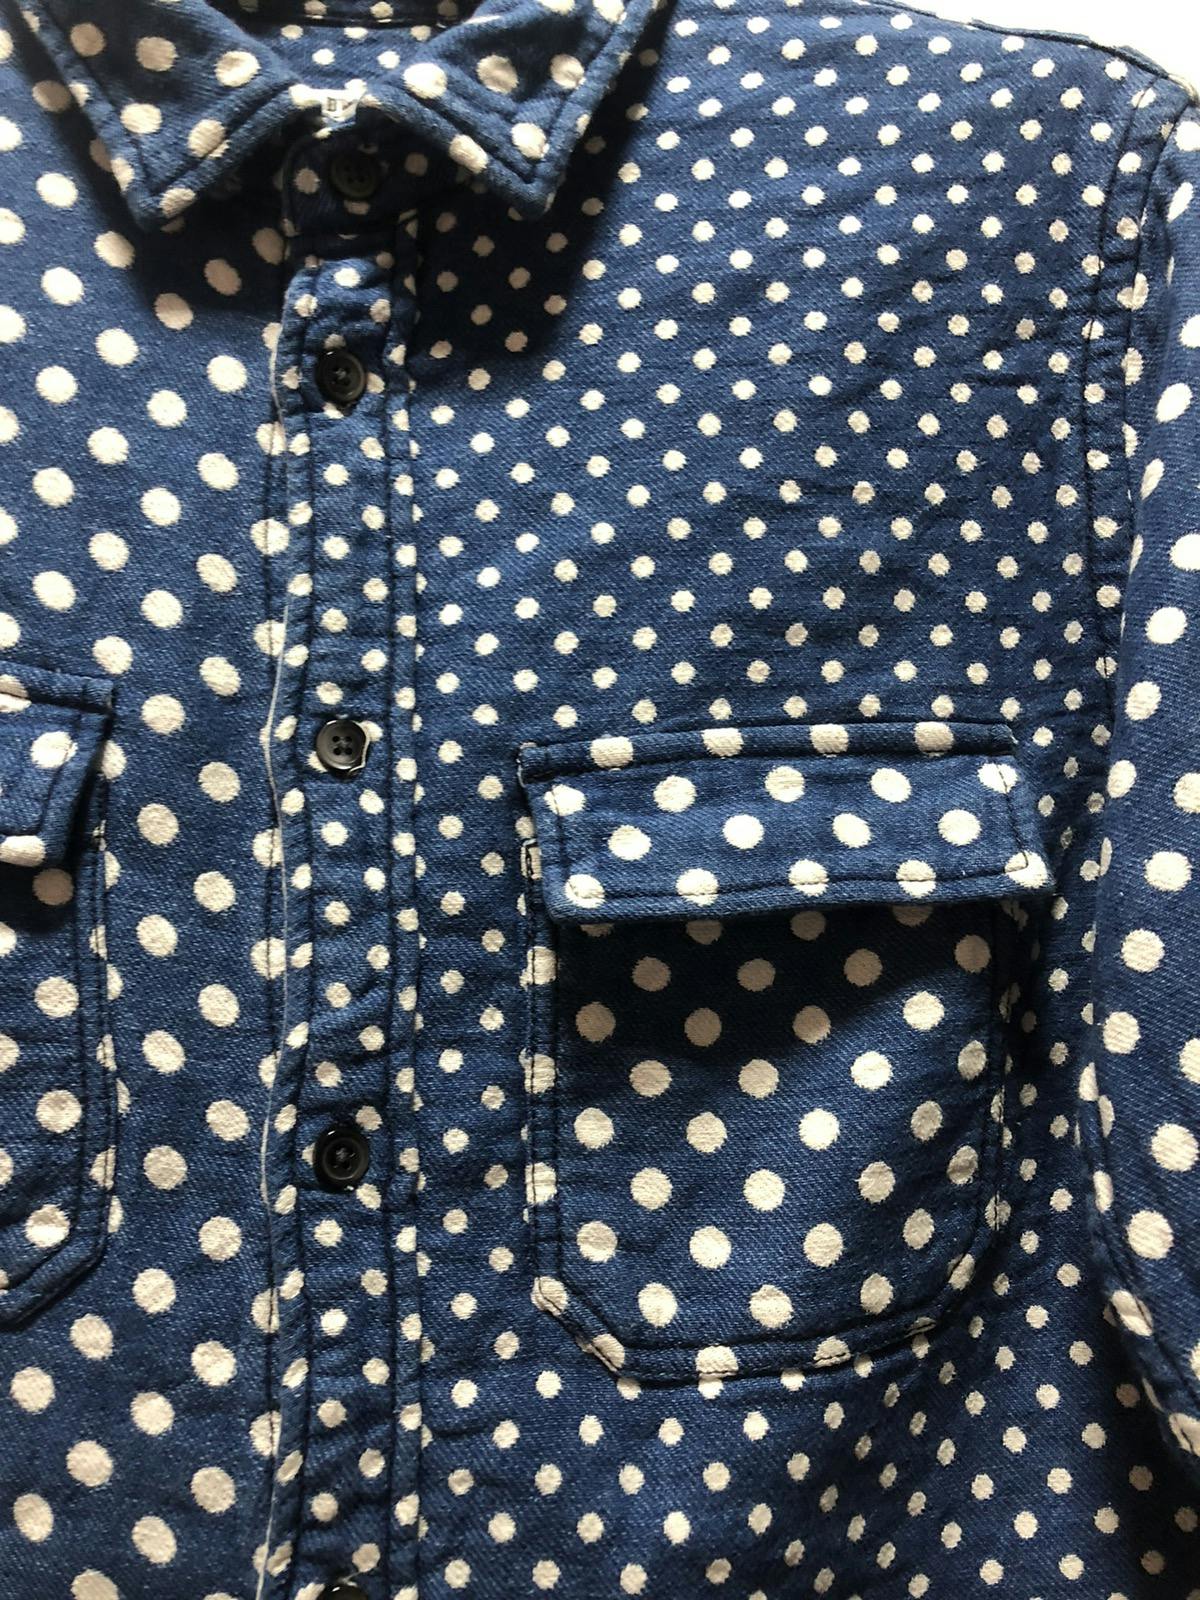 R NEWBOLD Shirt Flannel Japan Polka Dot Old And New - 3